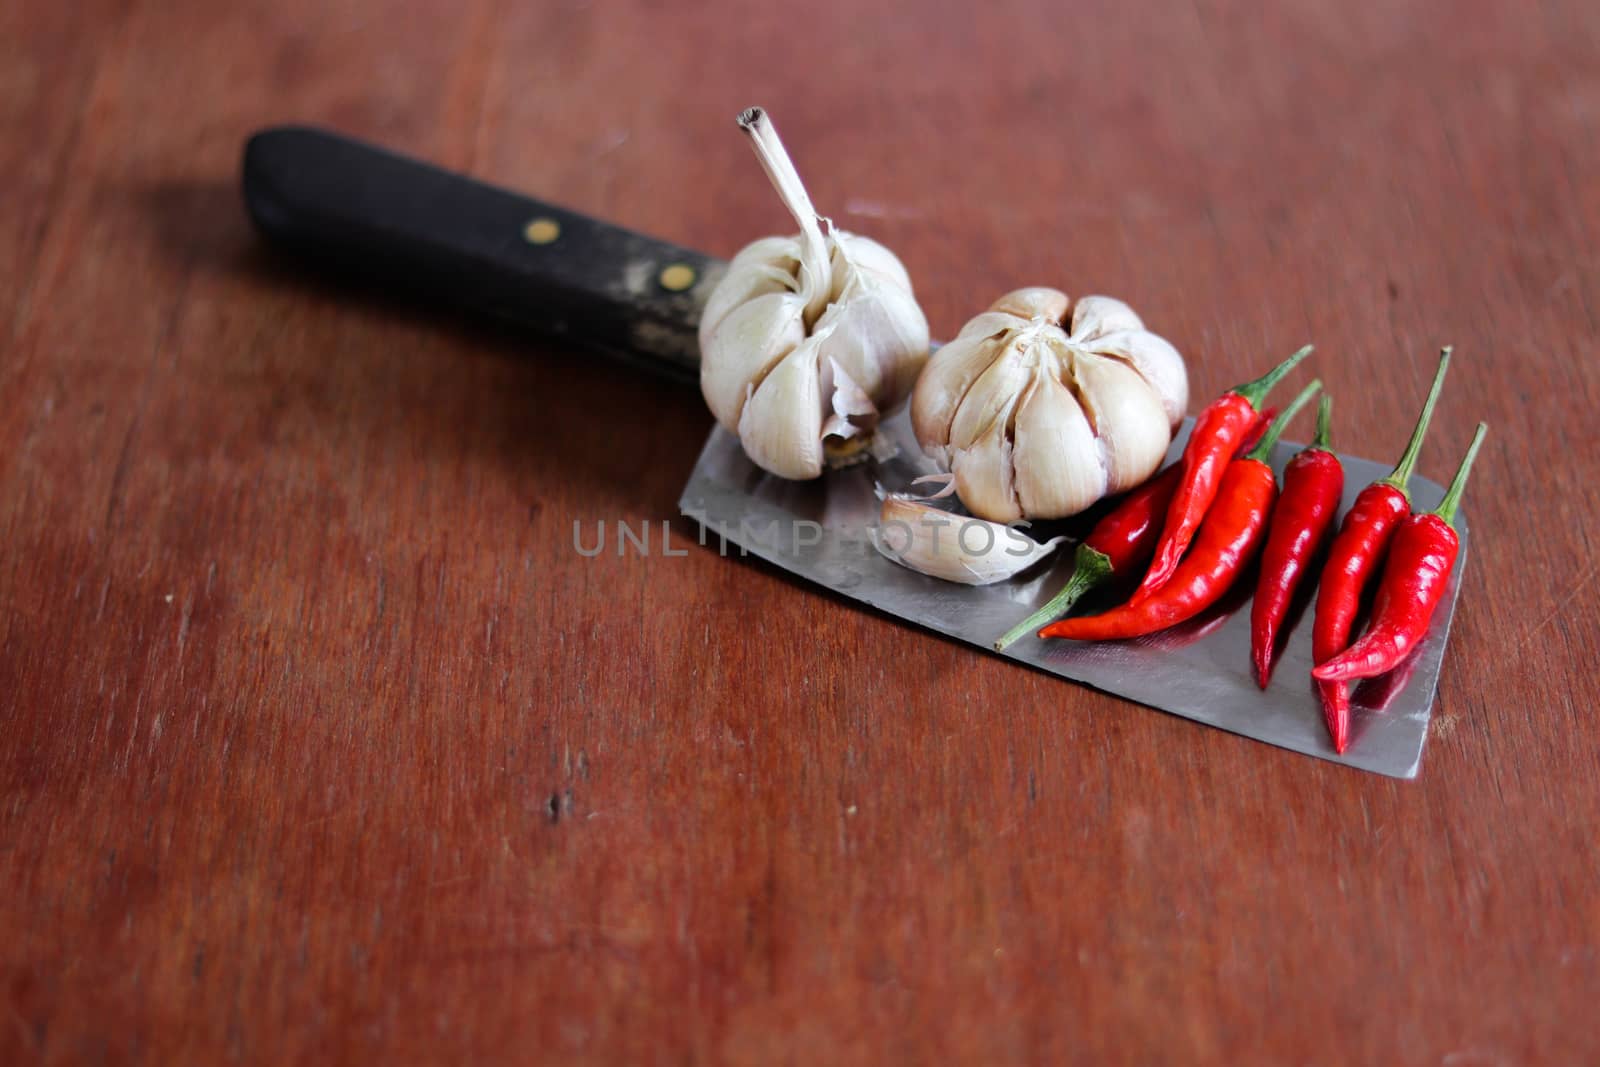 Still life photo of garlic and chilies on a knife to show concept of cooking, cuisine and gastronomy